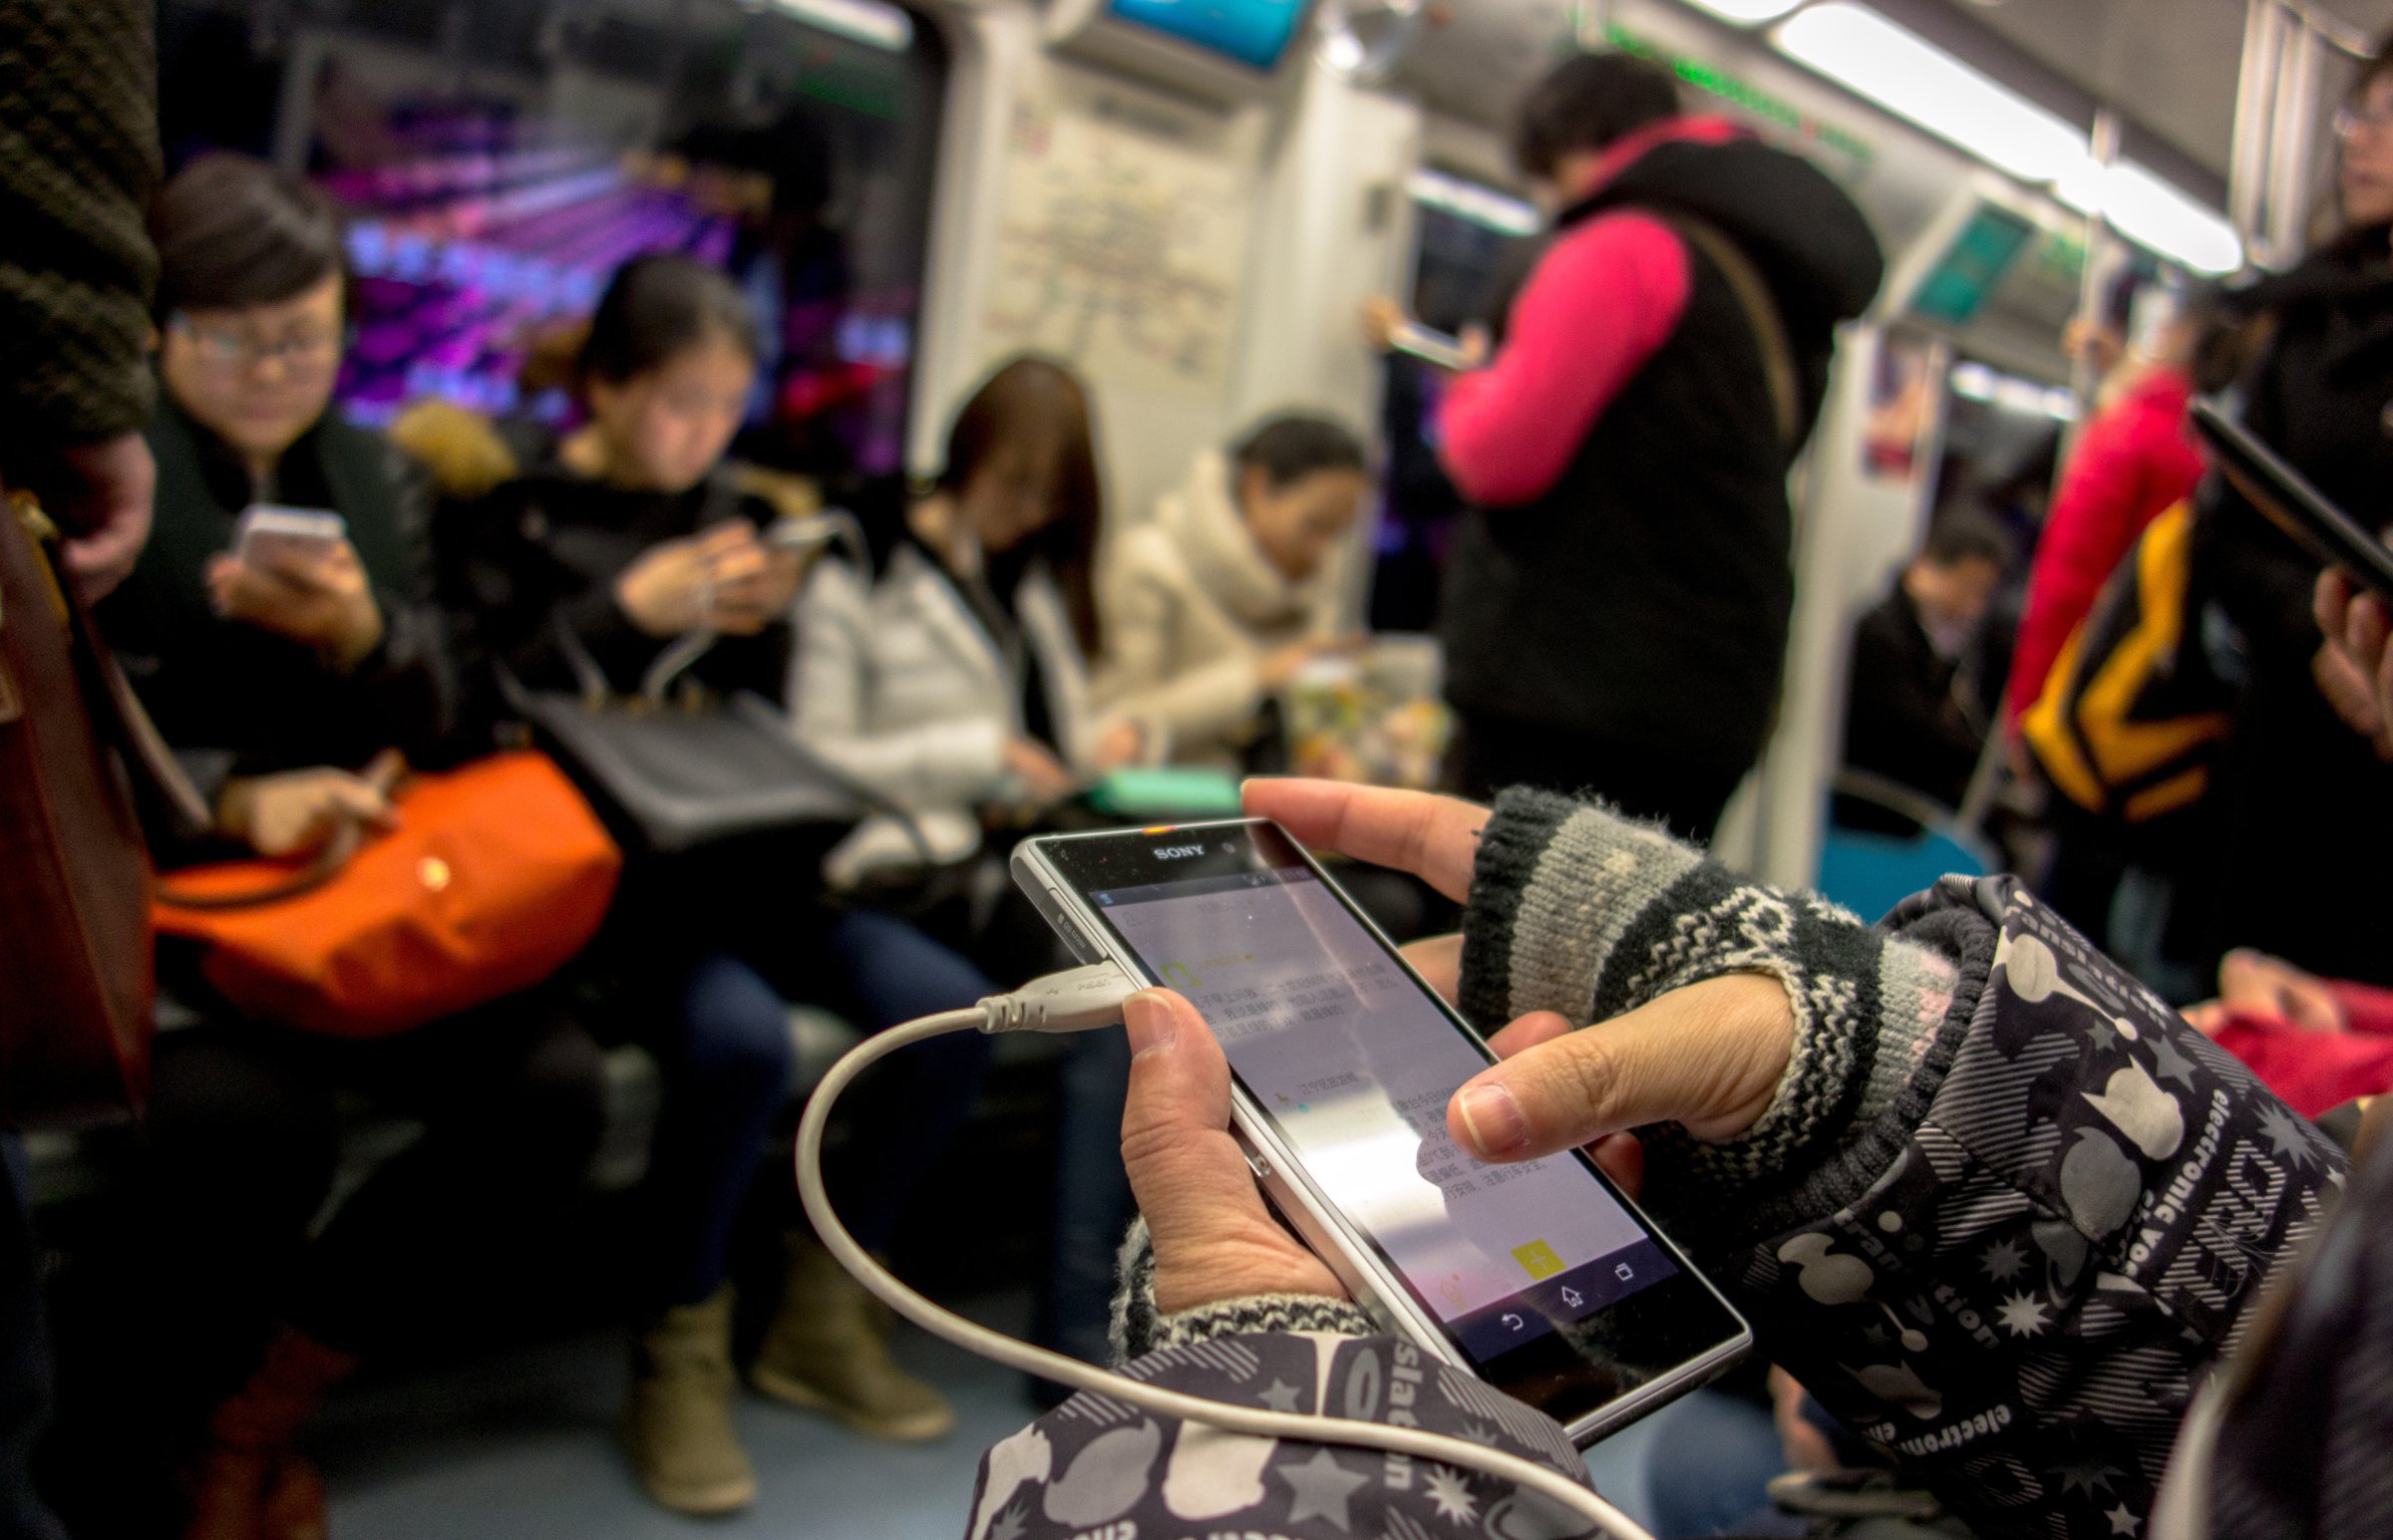 Passengers reads news or watch videos on their smart phones